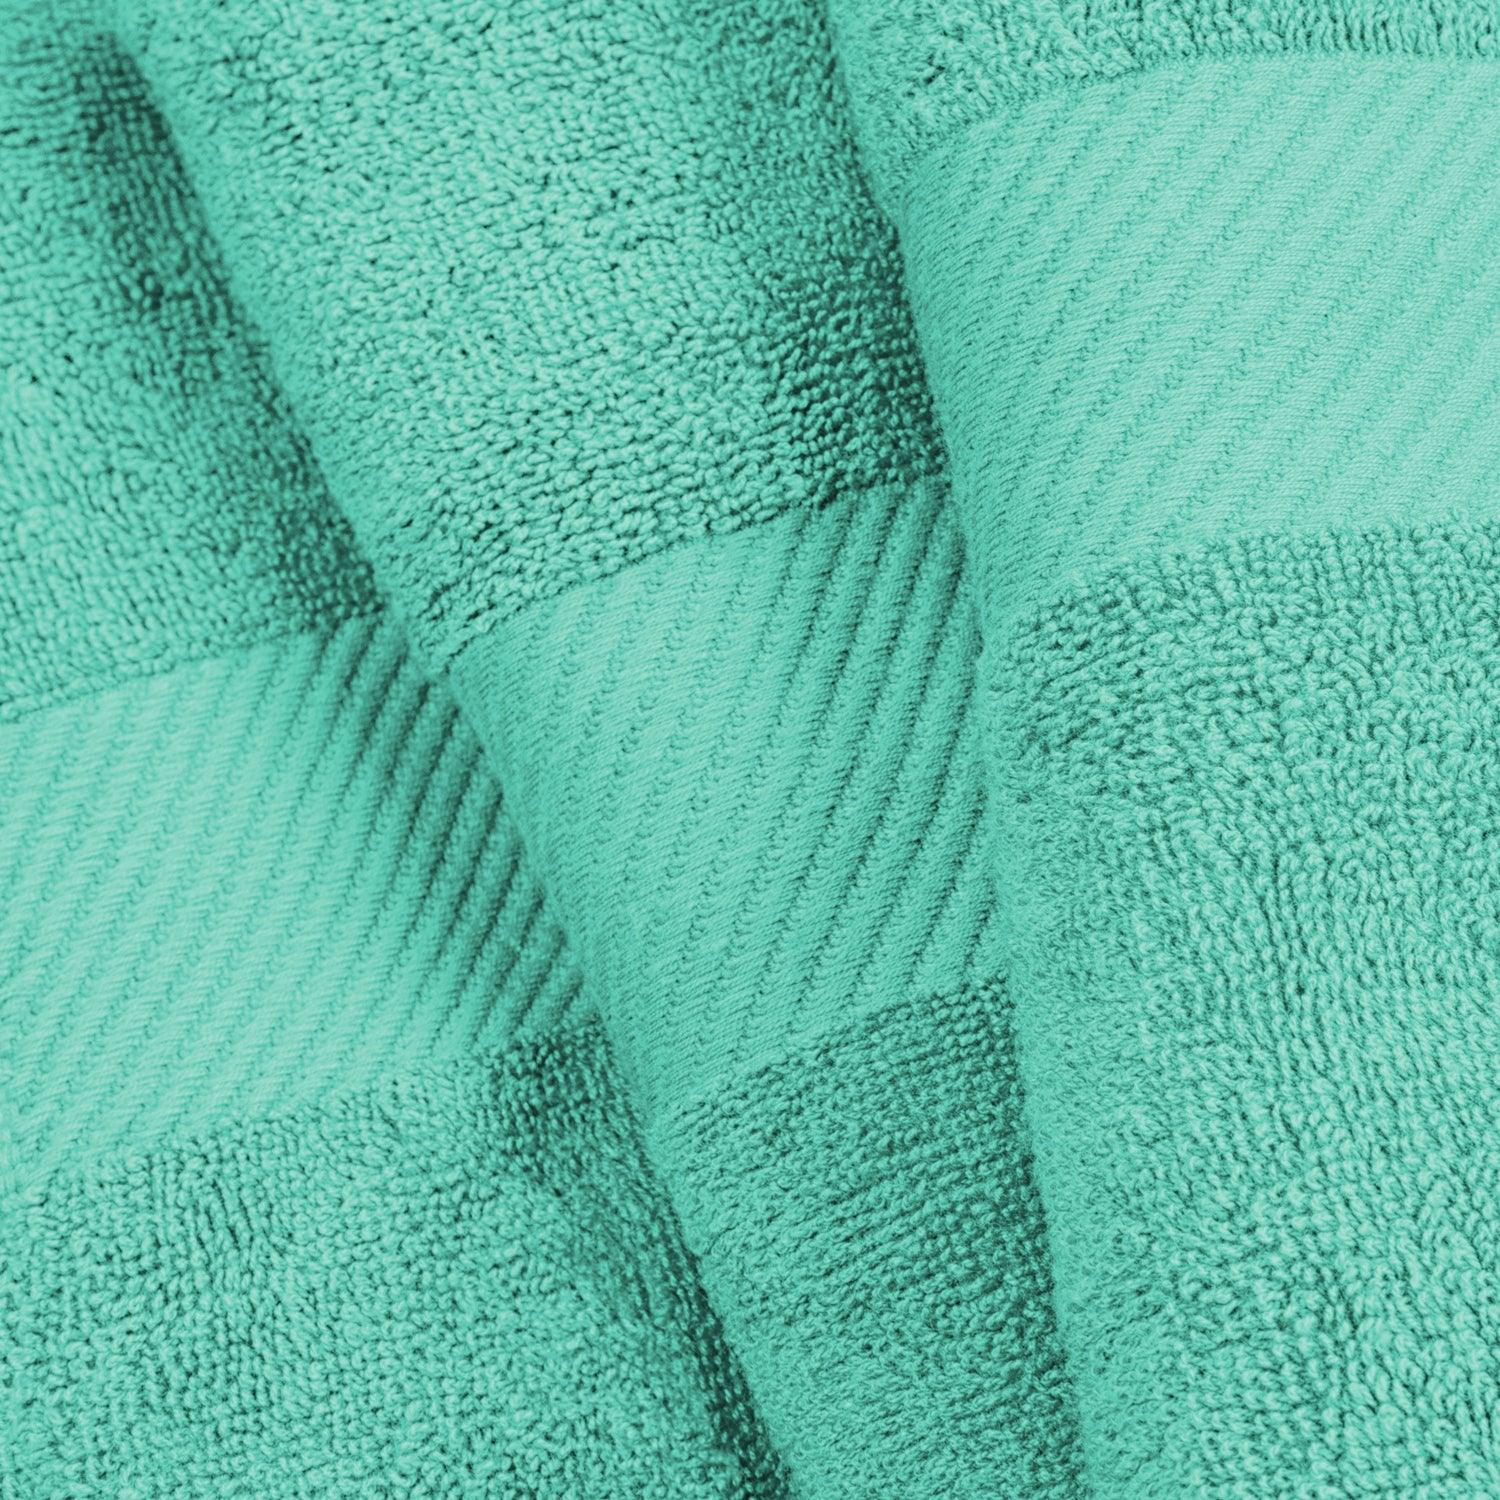 Kendell Egyptian Cotton Quick Drying 3-Piece Towel Set - Sea Green